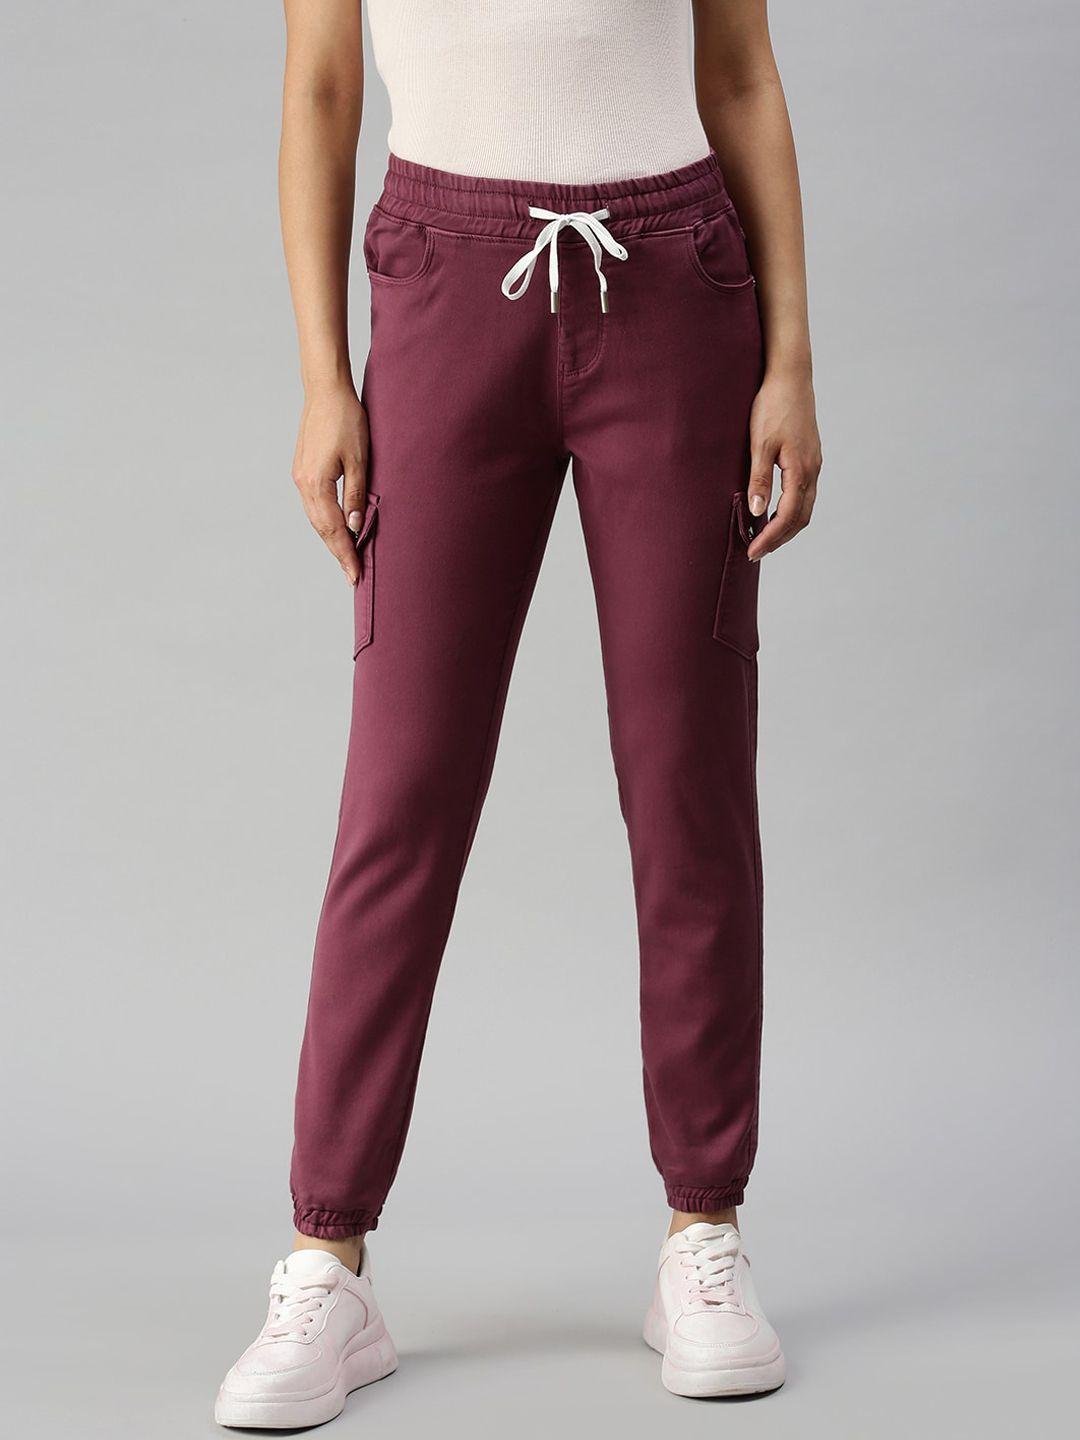 showoff-women-lavender-jogger-high-rise-low-distress-cuffed-hem-stretchable-jeans